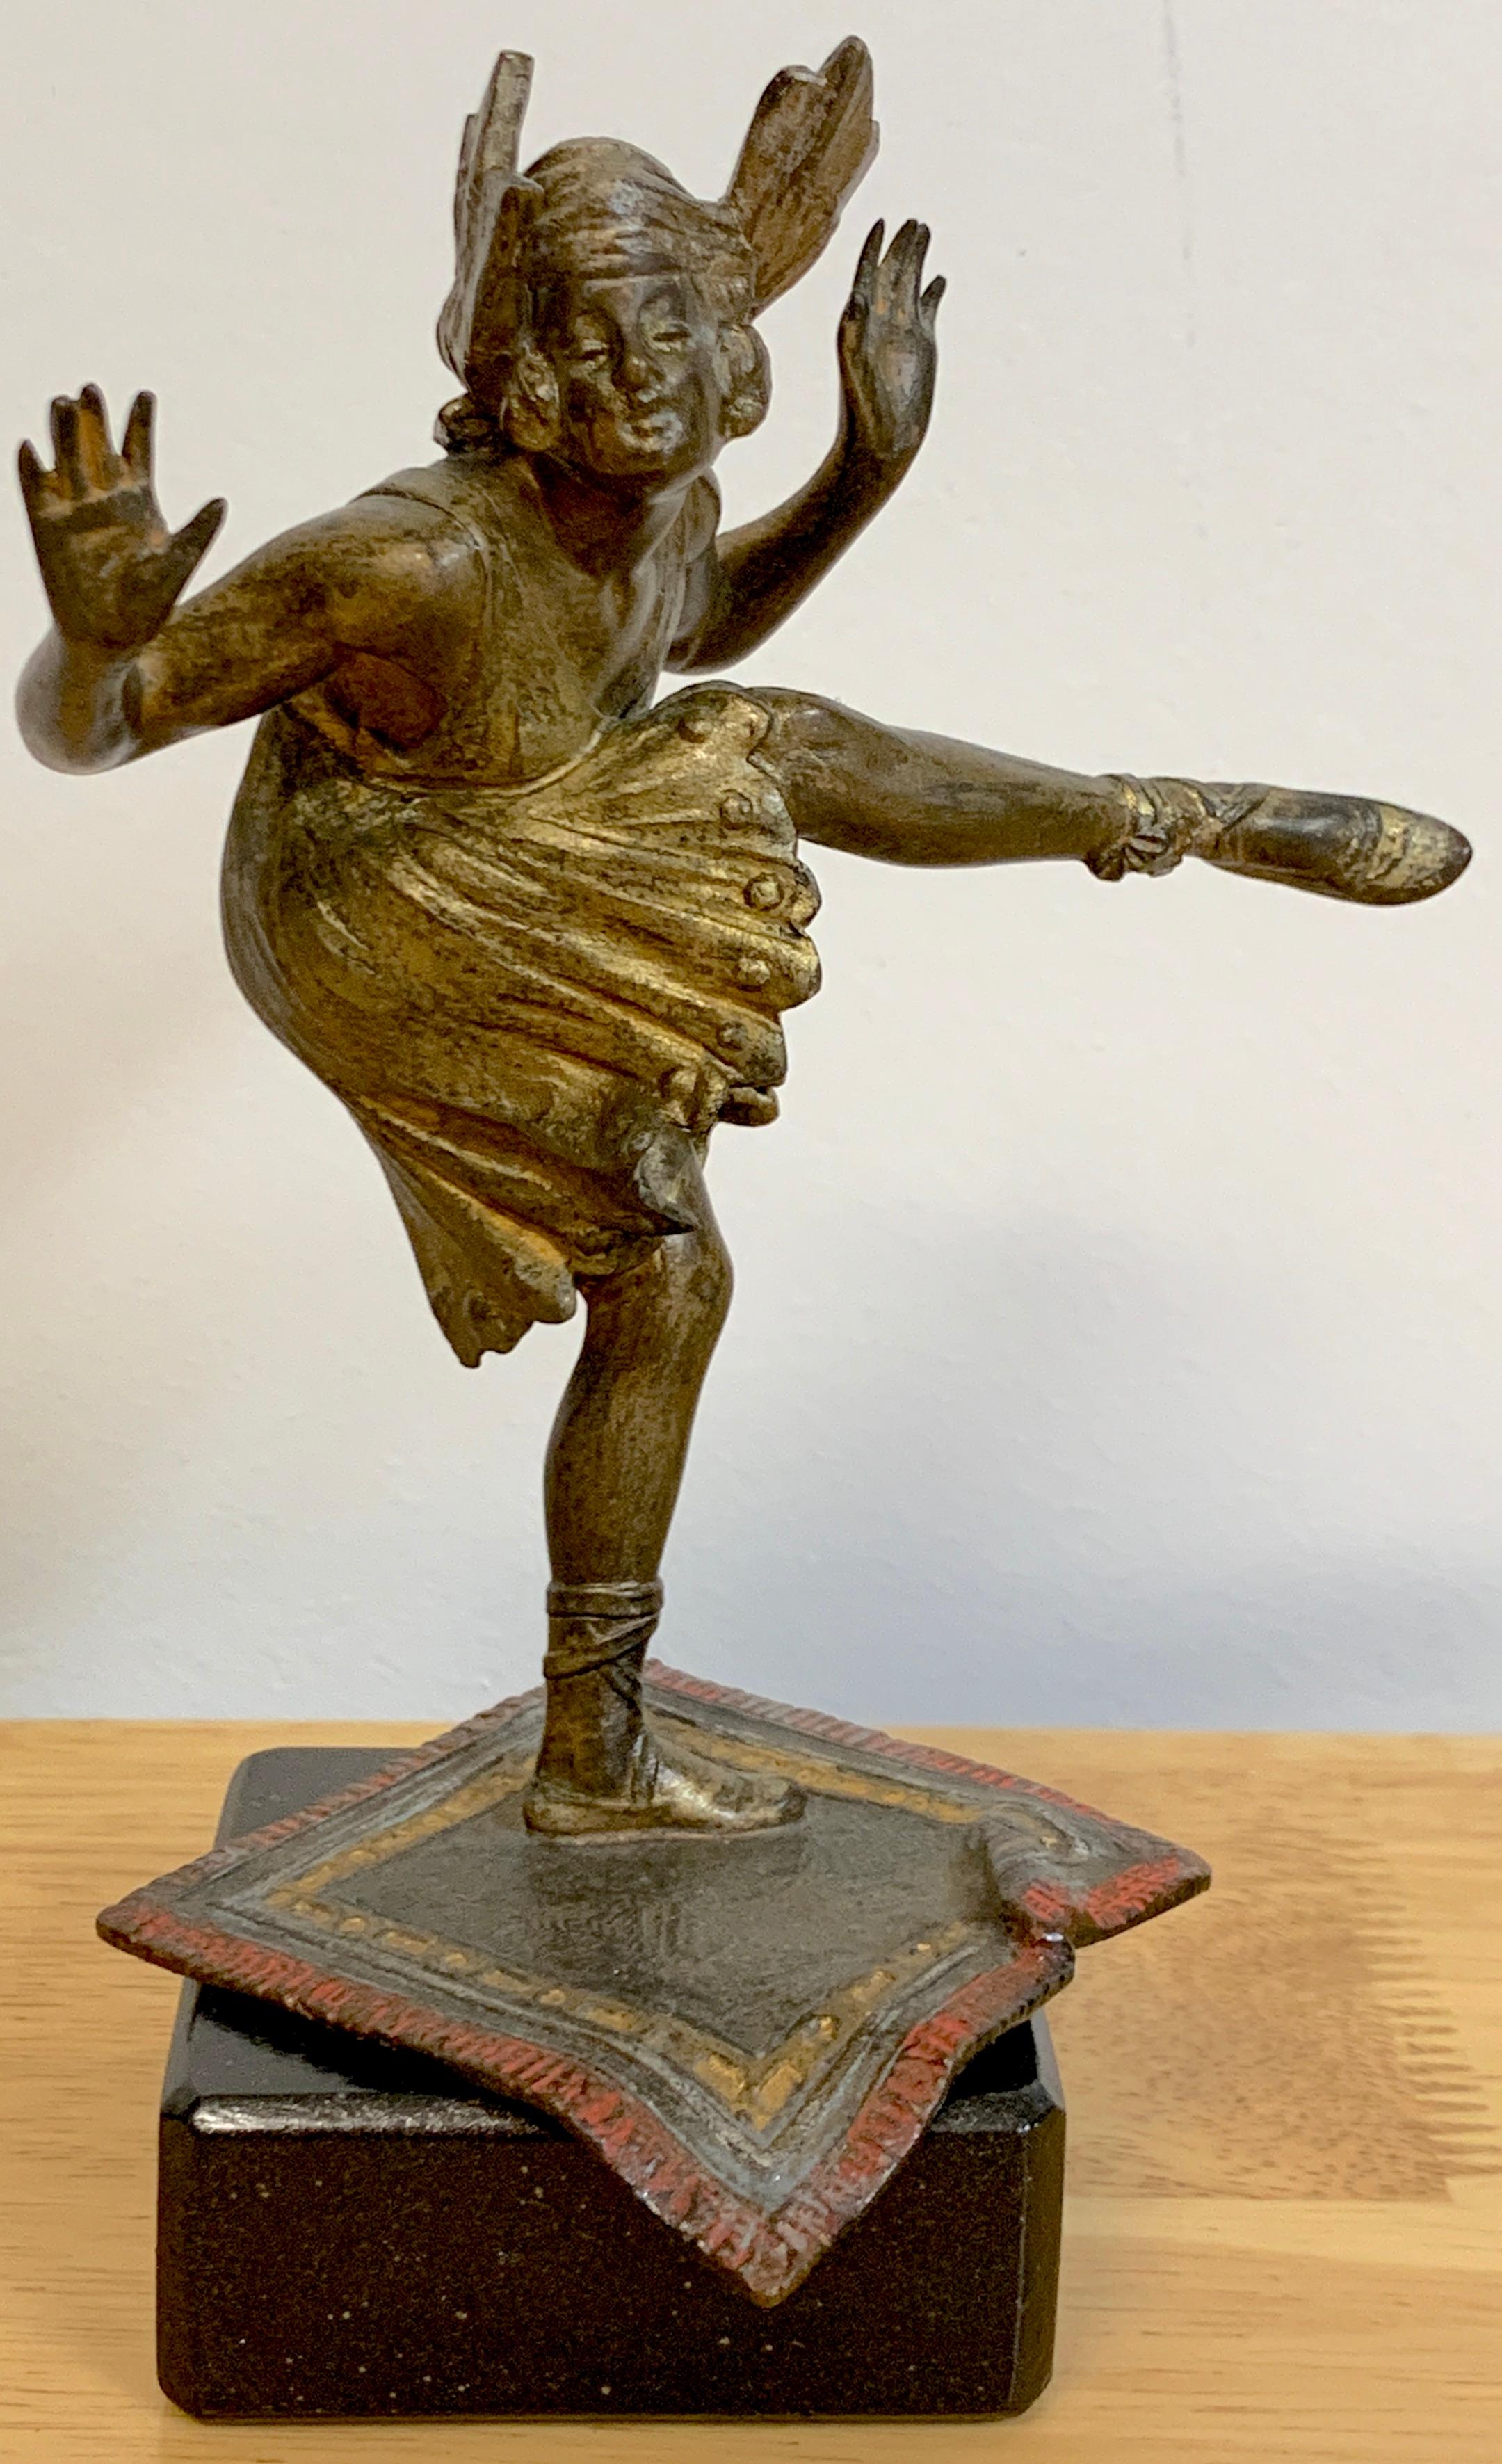 Vienna cold painted bronze dancing flapper, attributed to Bergman 
Fantastically modeled and painted, beautifully patinated surface, unsigned
This work stands 6.5-inches high x 3-inches wide x 3-inches deep.